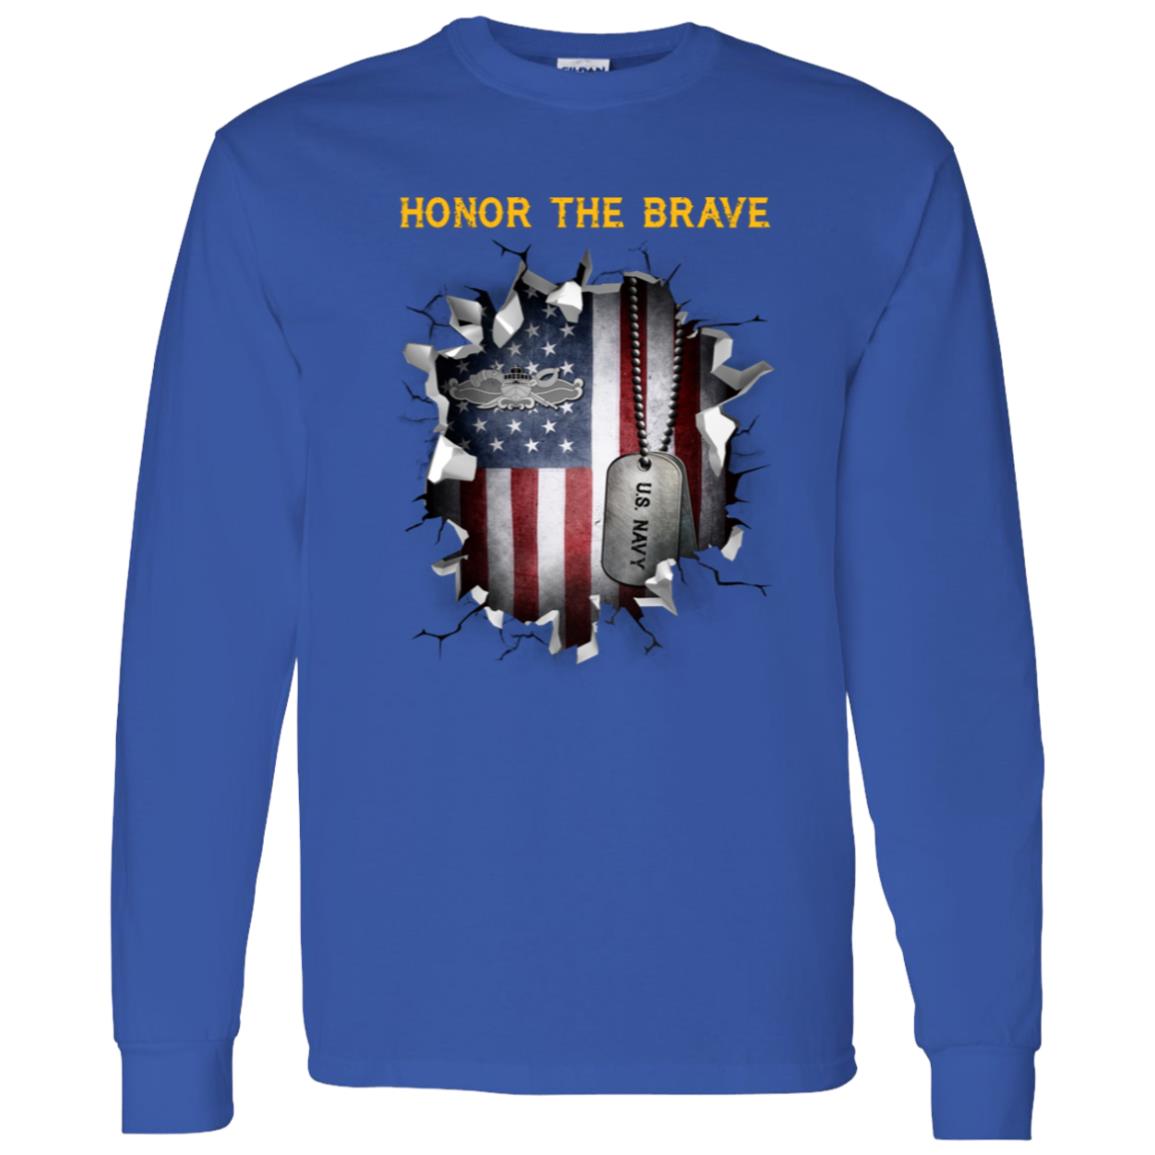 U.S. Navy special warfare combatant-craft crewmen (SWCC) - Honor The Brave Front Shirt